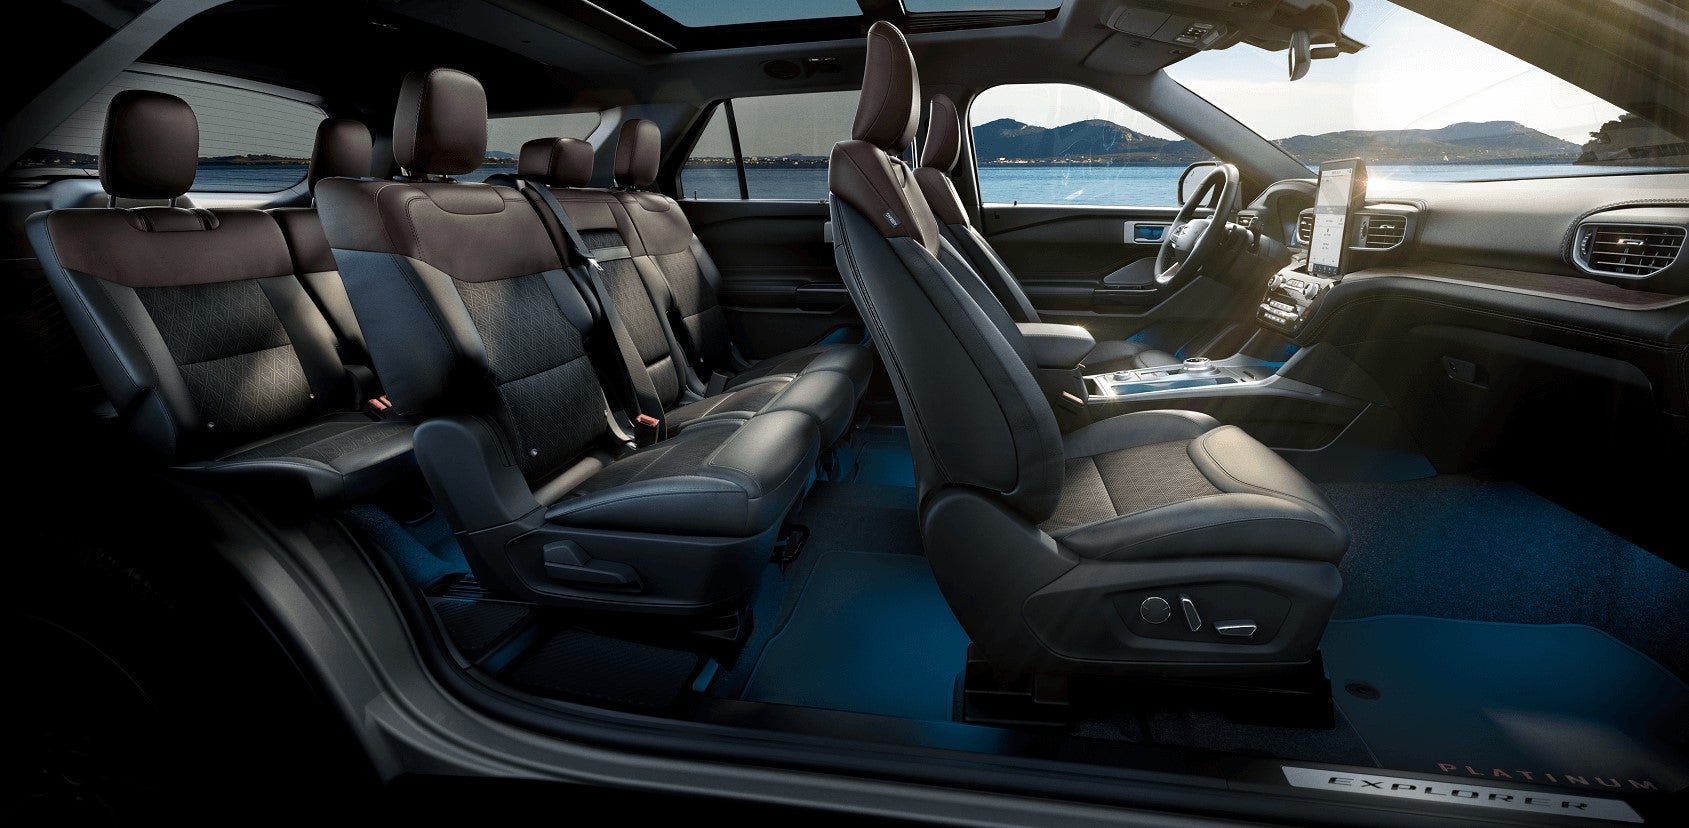 The 2021 Ford Explorer's interior pictured from the side with all three rows of leather seats.